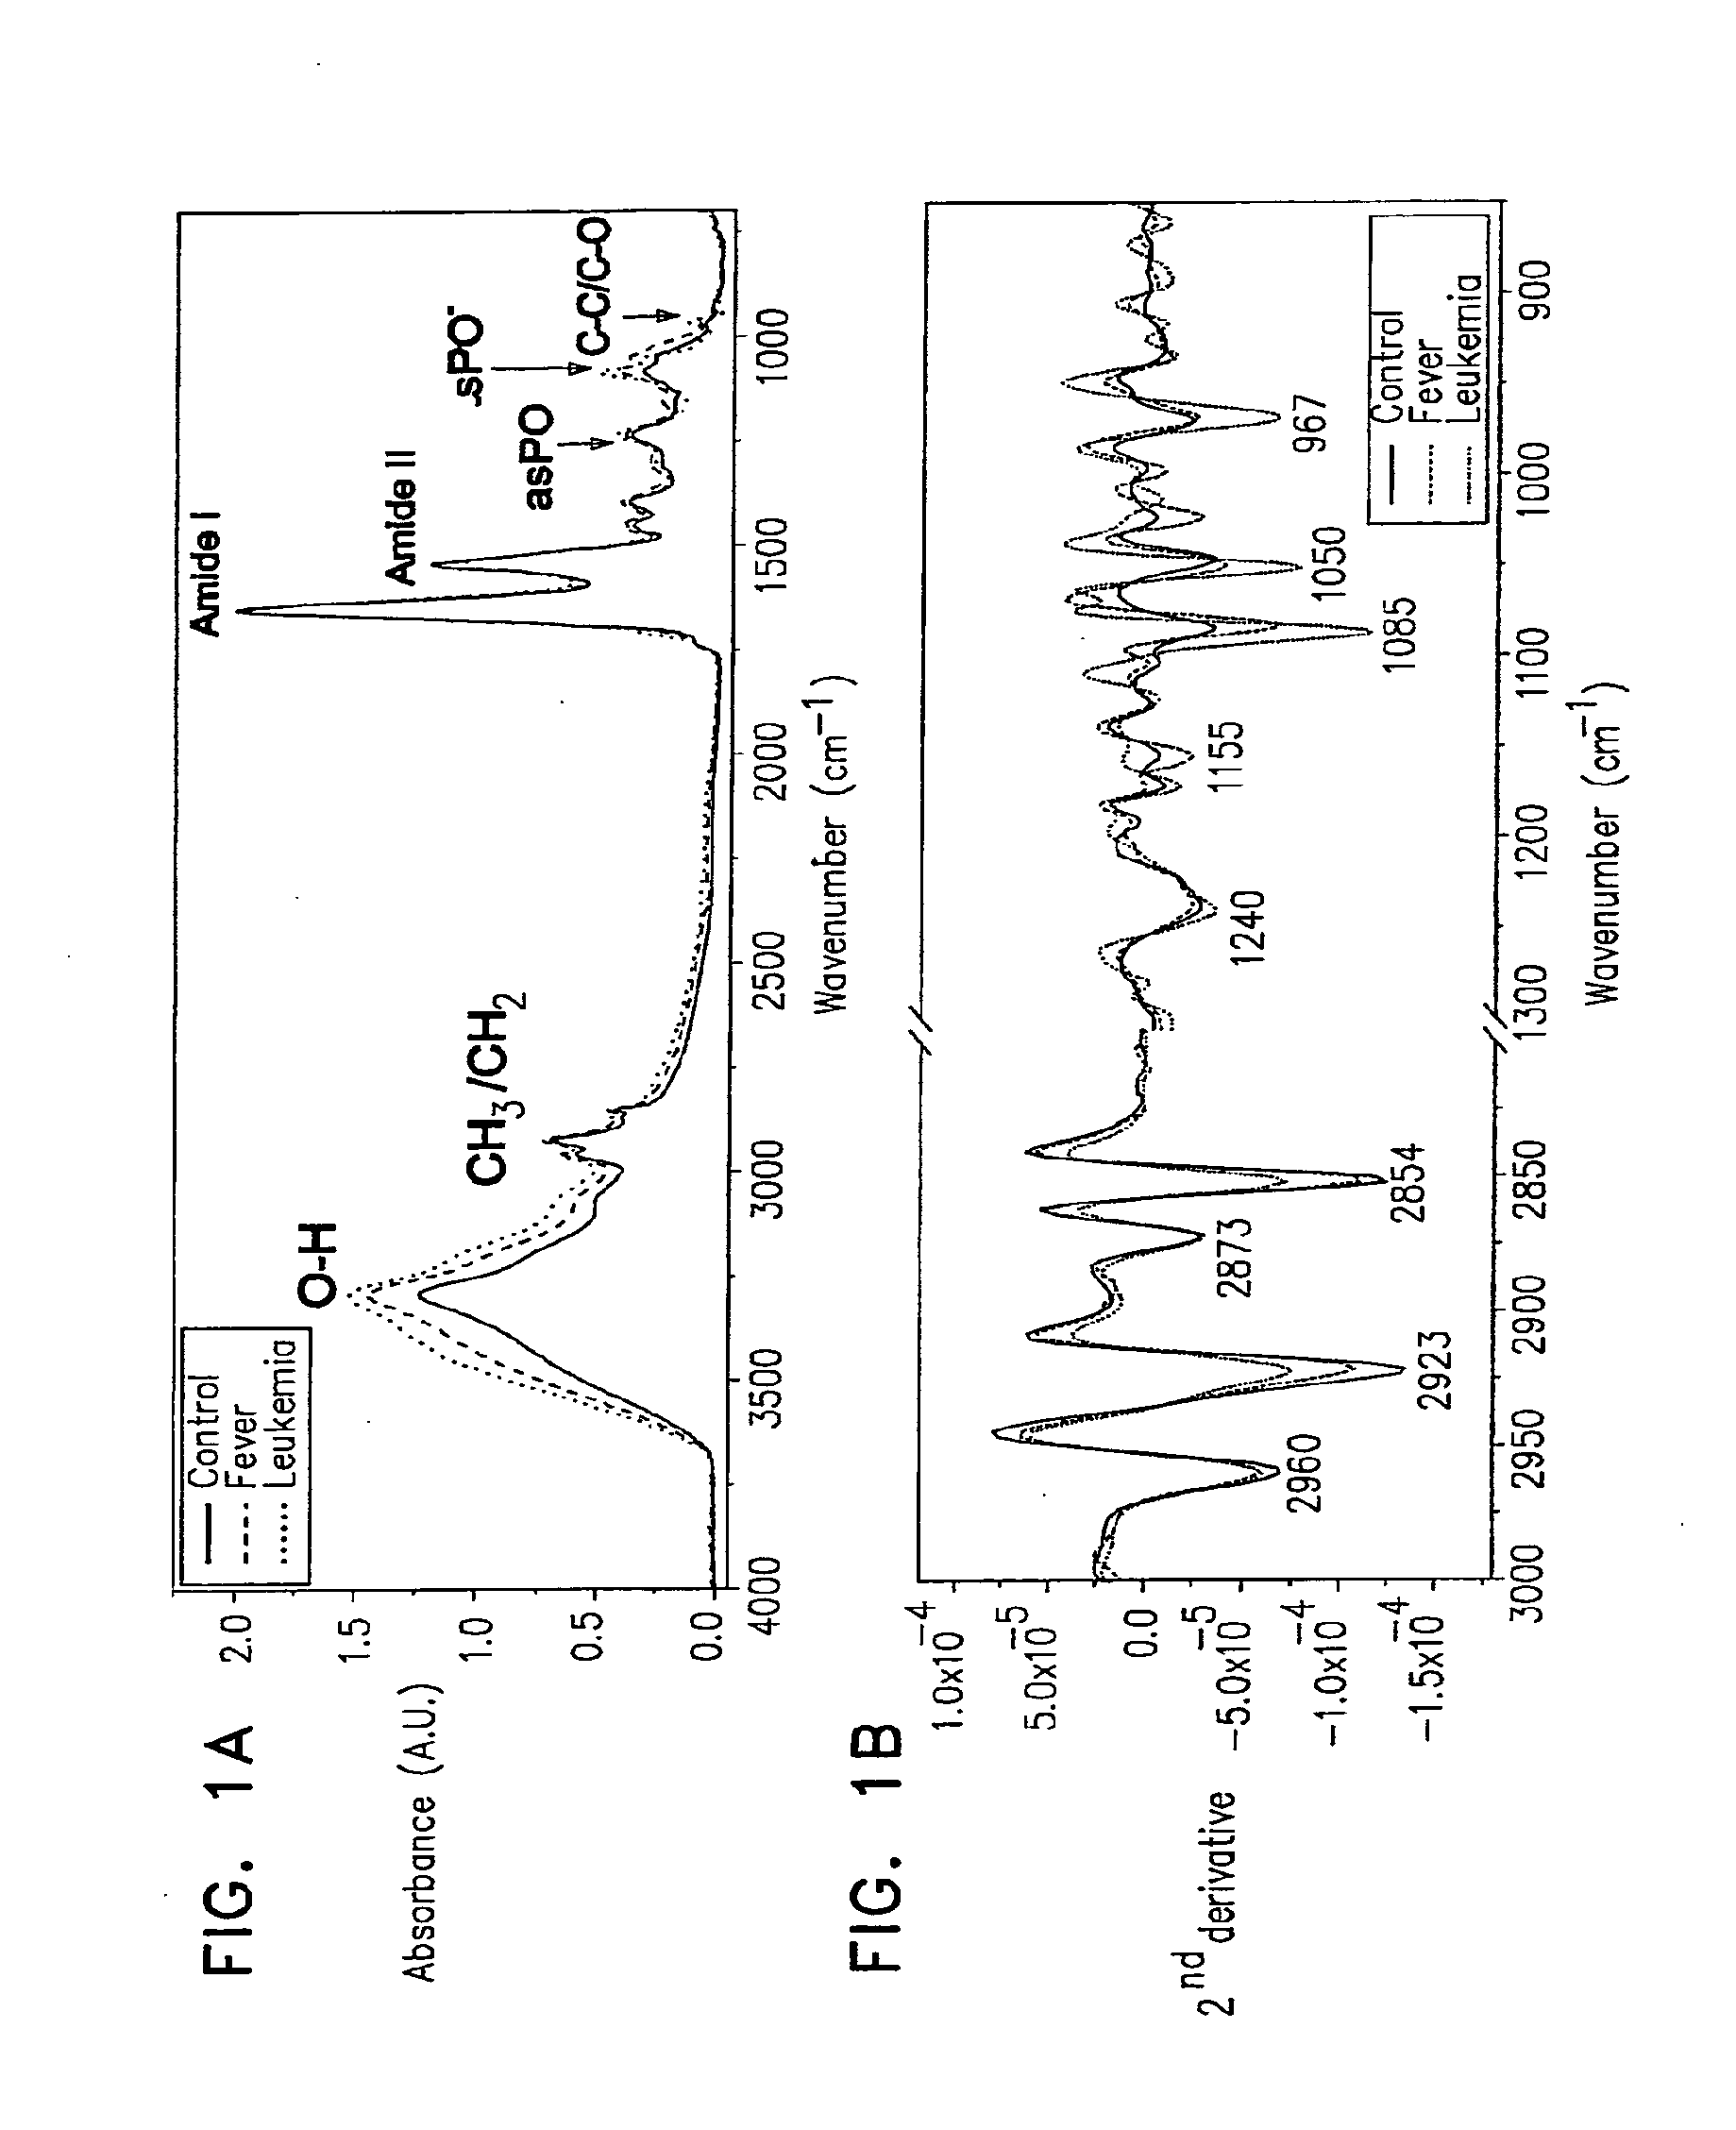 Method and system for detecting and monitoring hematological cancer